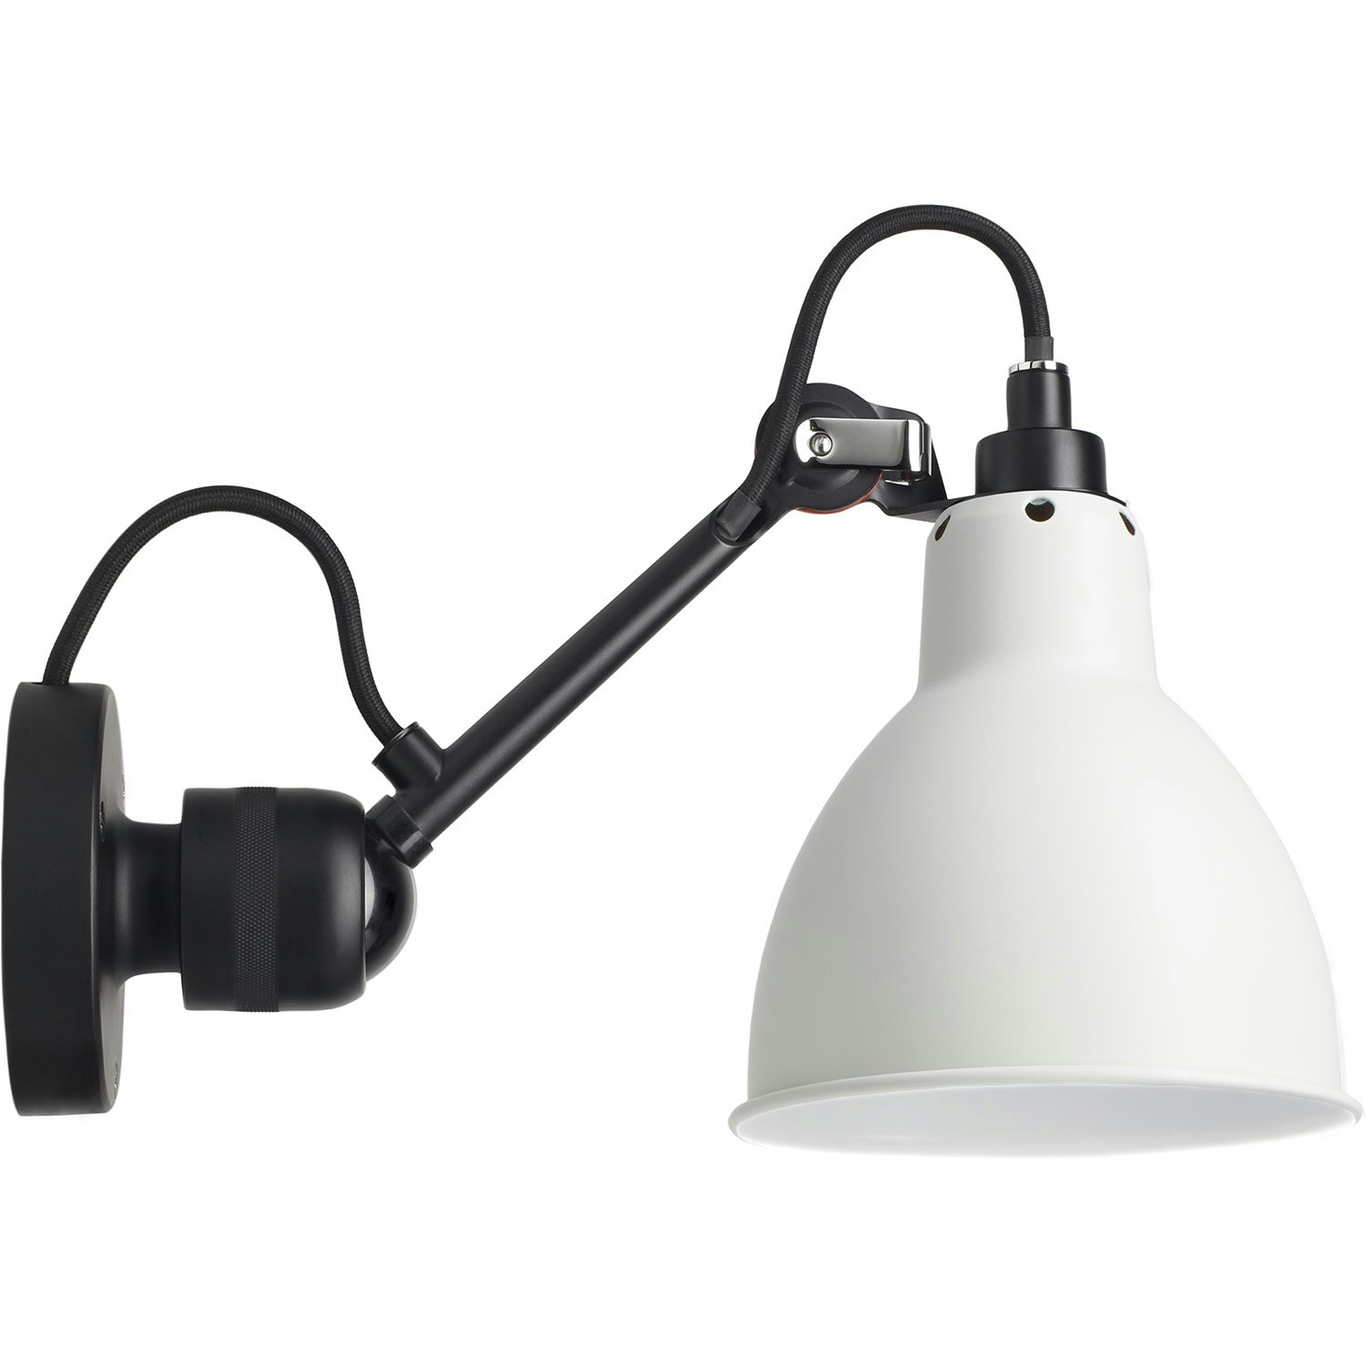 La Lampe Gras N°304 Wall Lamp With Switch, Black / White